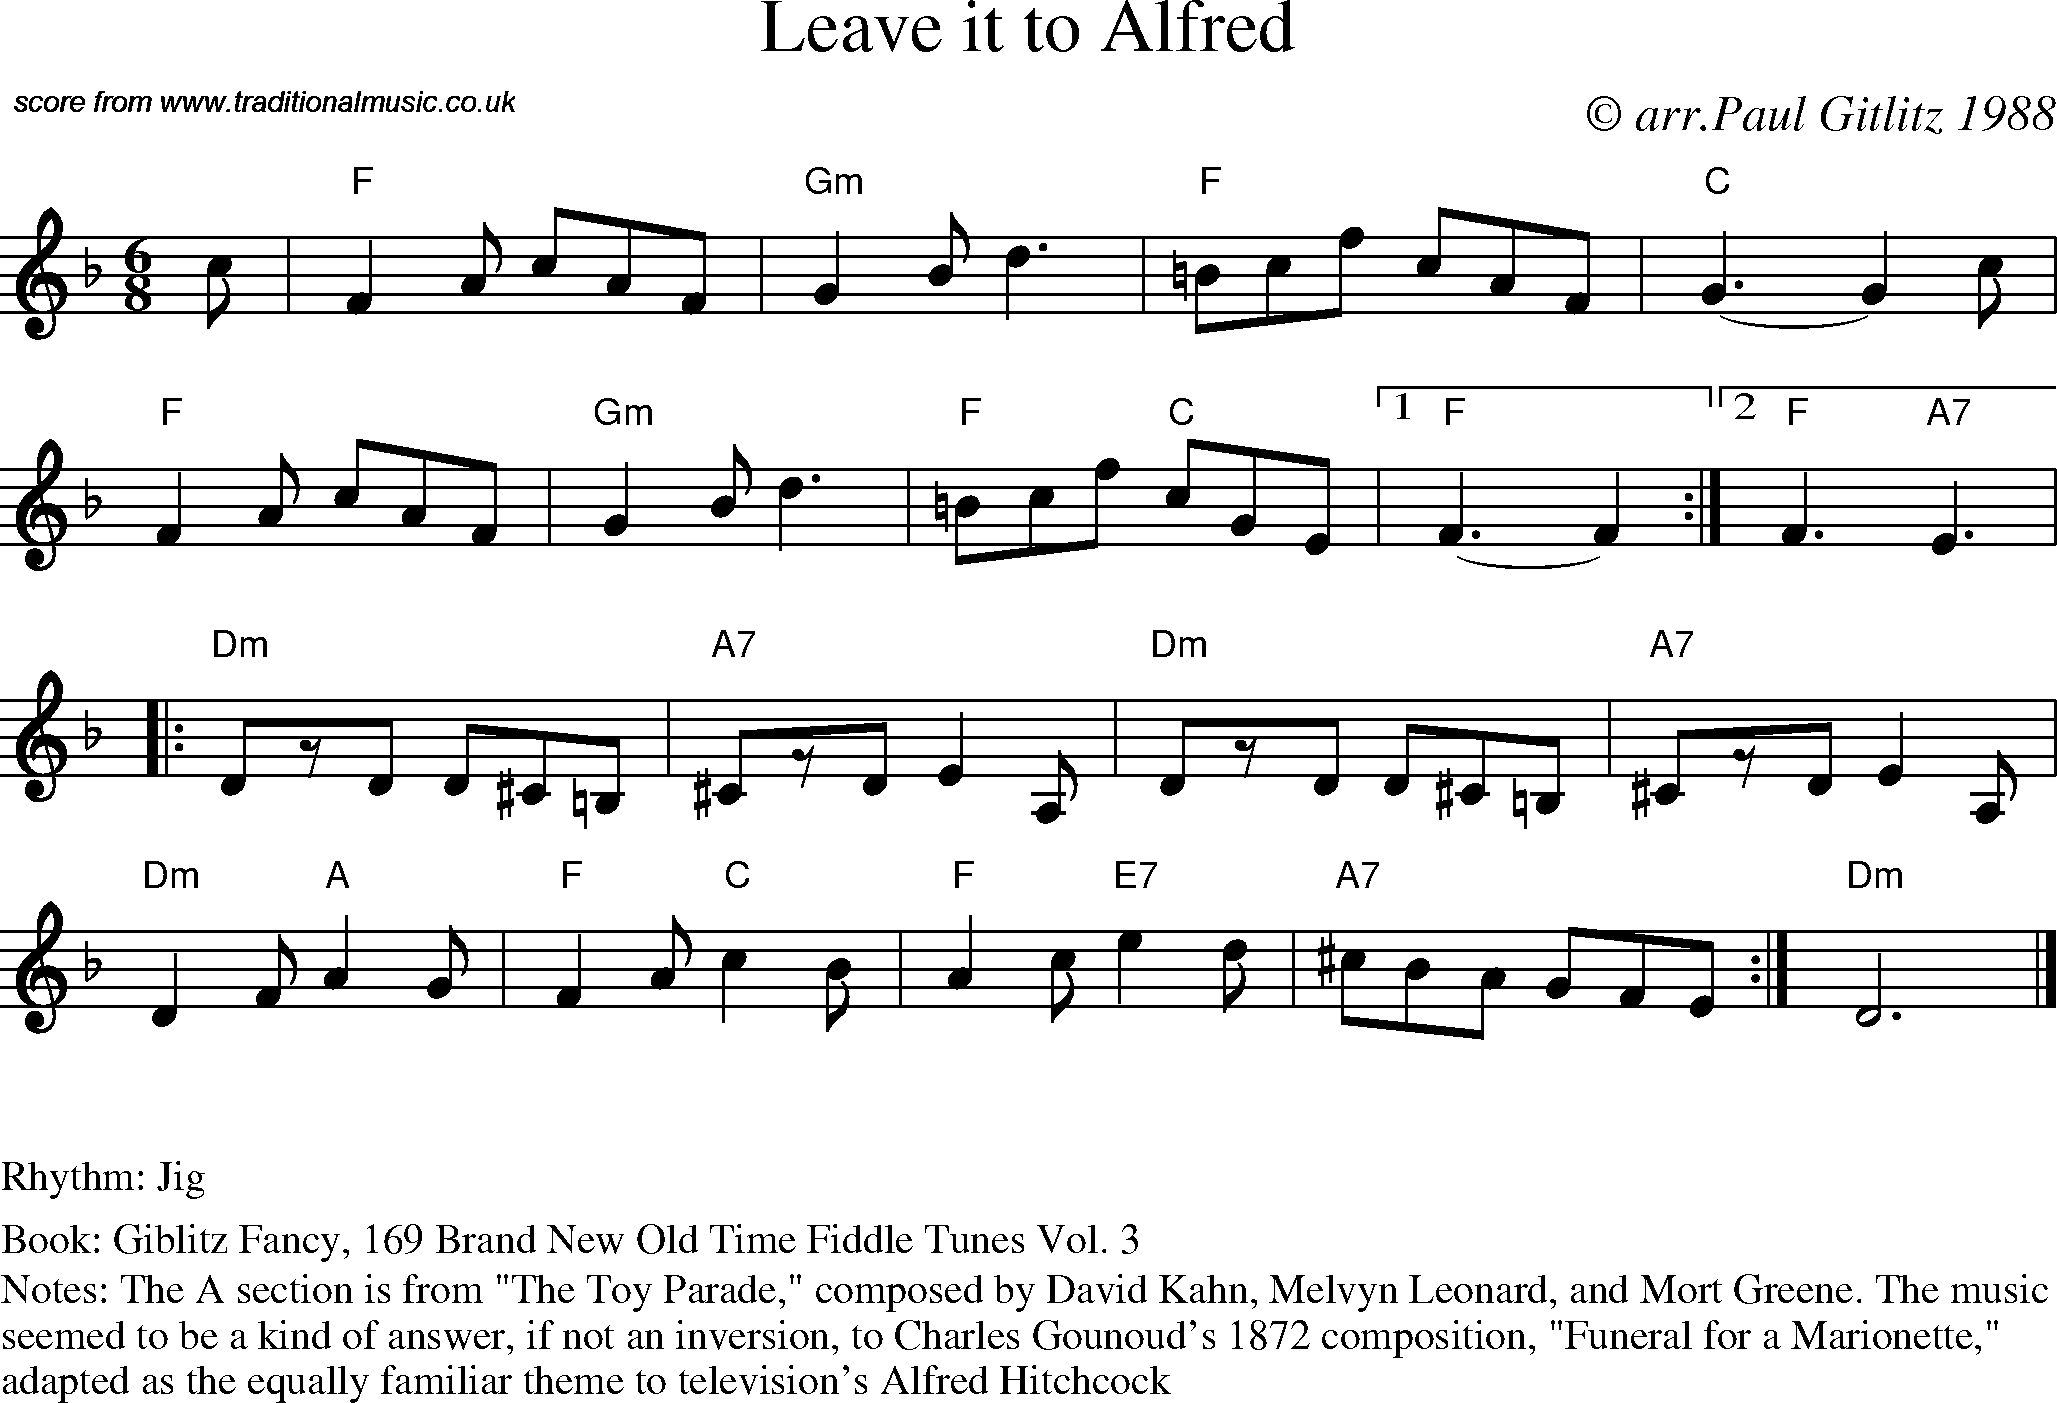 Sheet Music Score for Jig - Leave it to Alfred